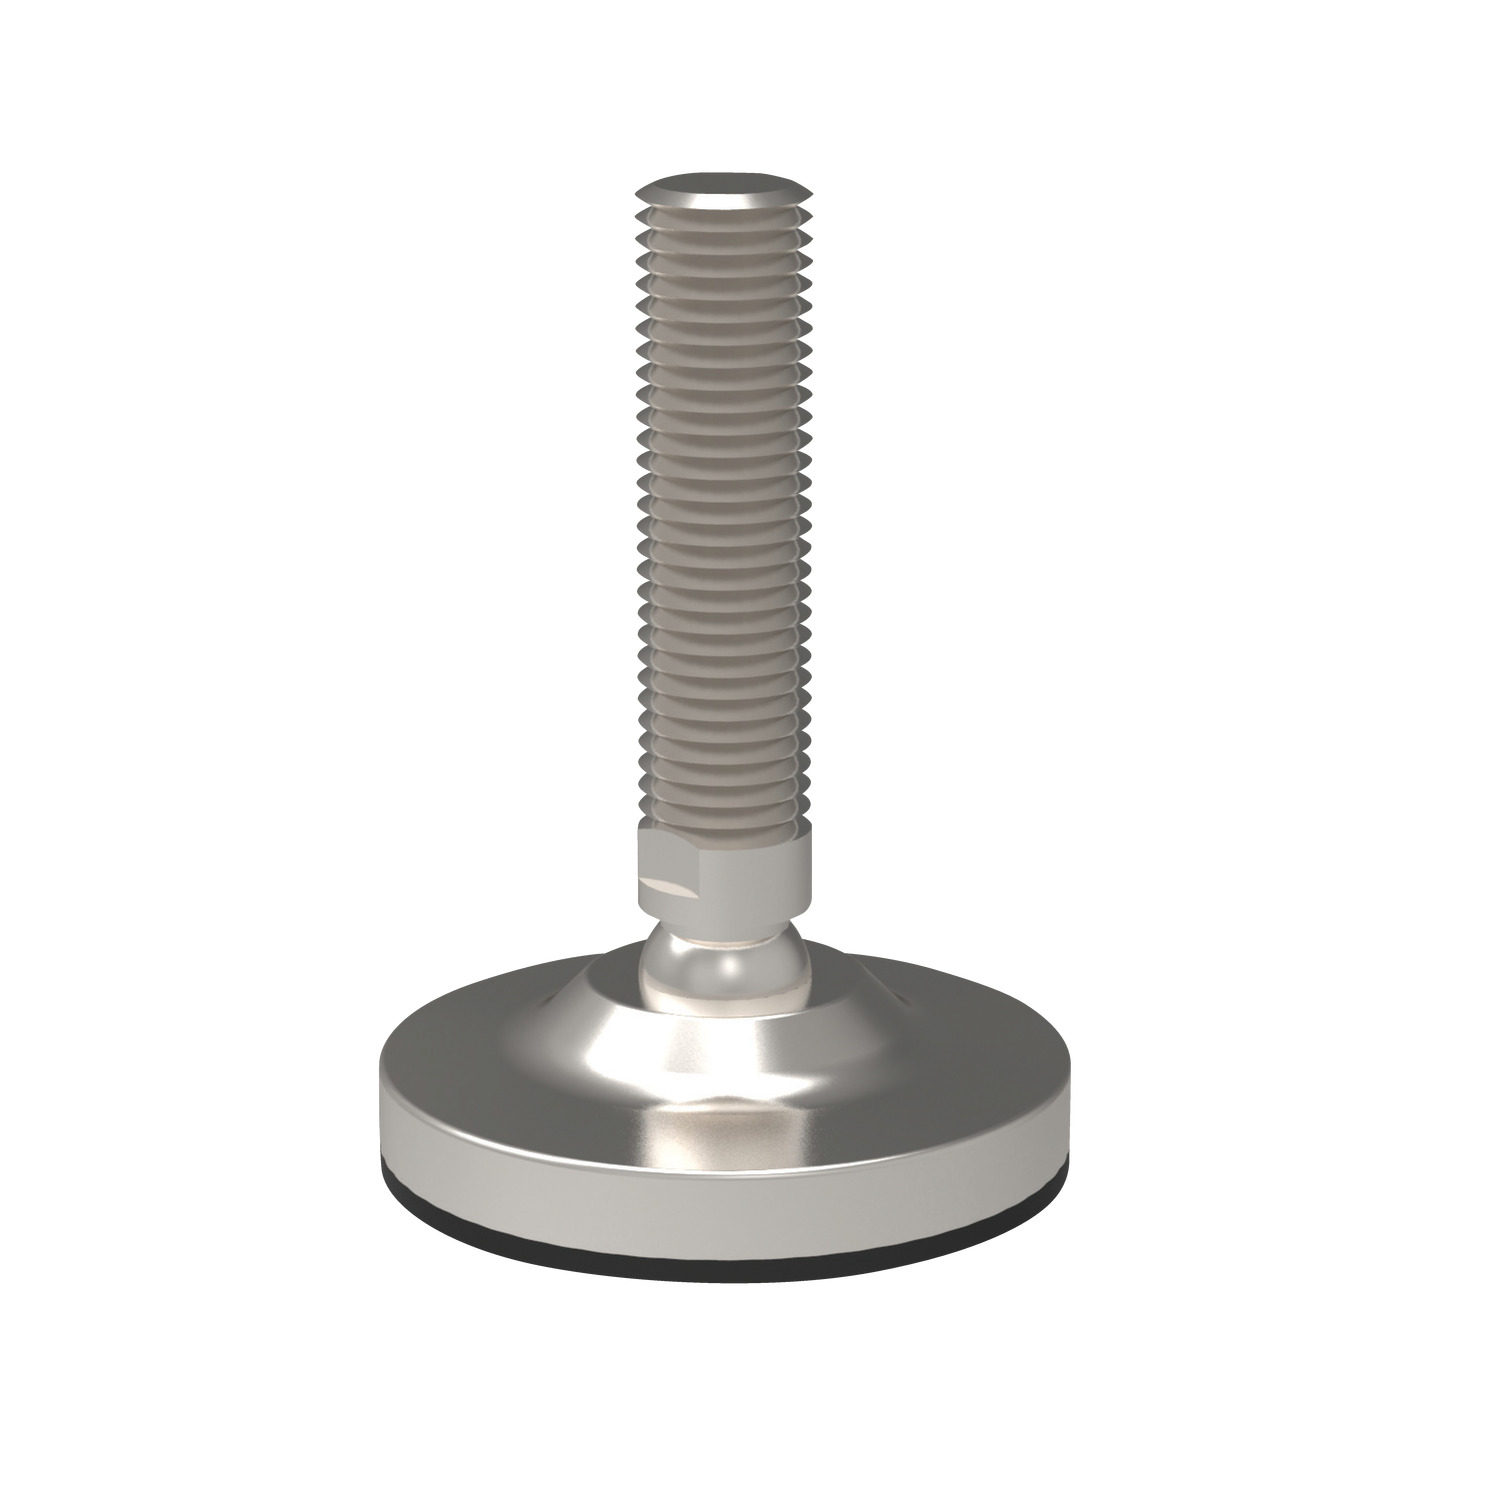 Mini Levelling Feet Mini articulated levelling feet made from stainless steel (AISI 304, AISI 316 on request). Thread bolt allows for up to 30° articulation of the foot.